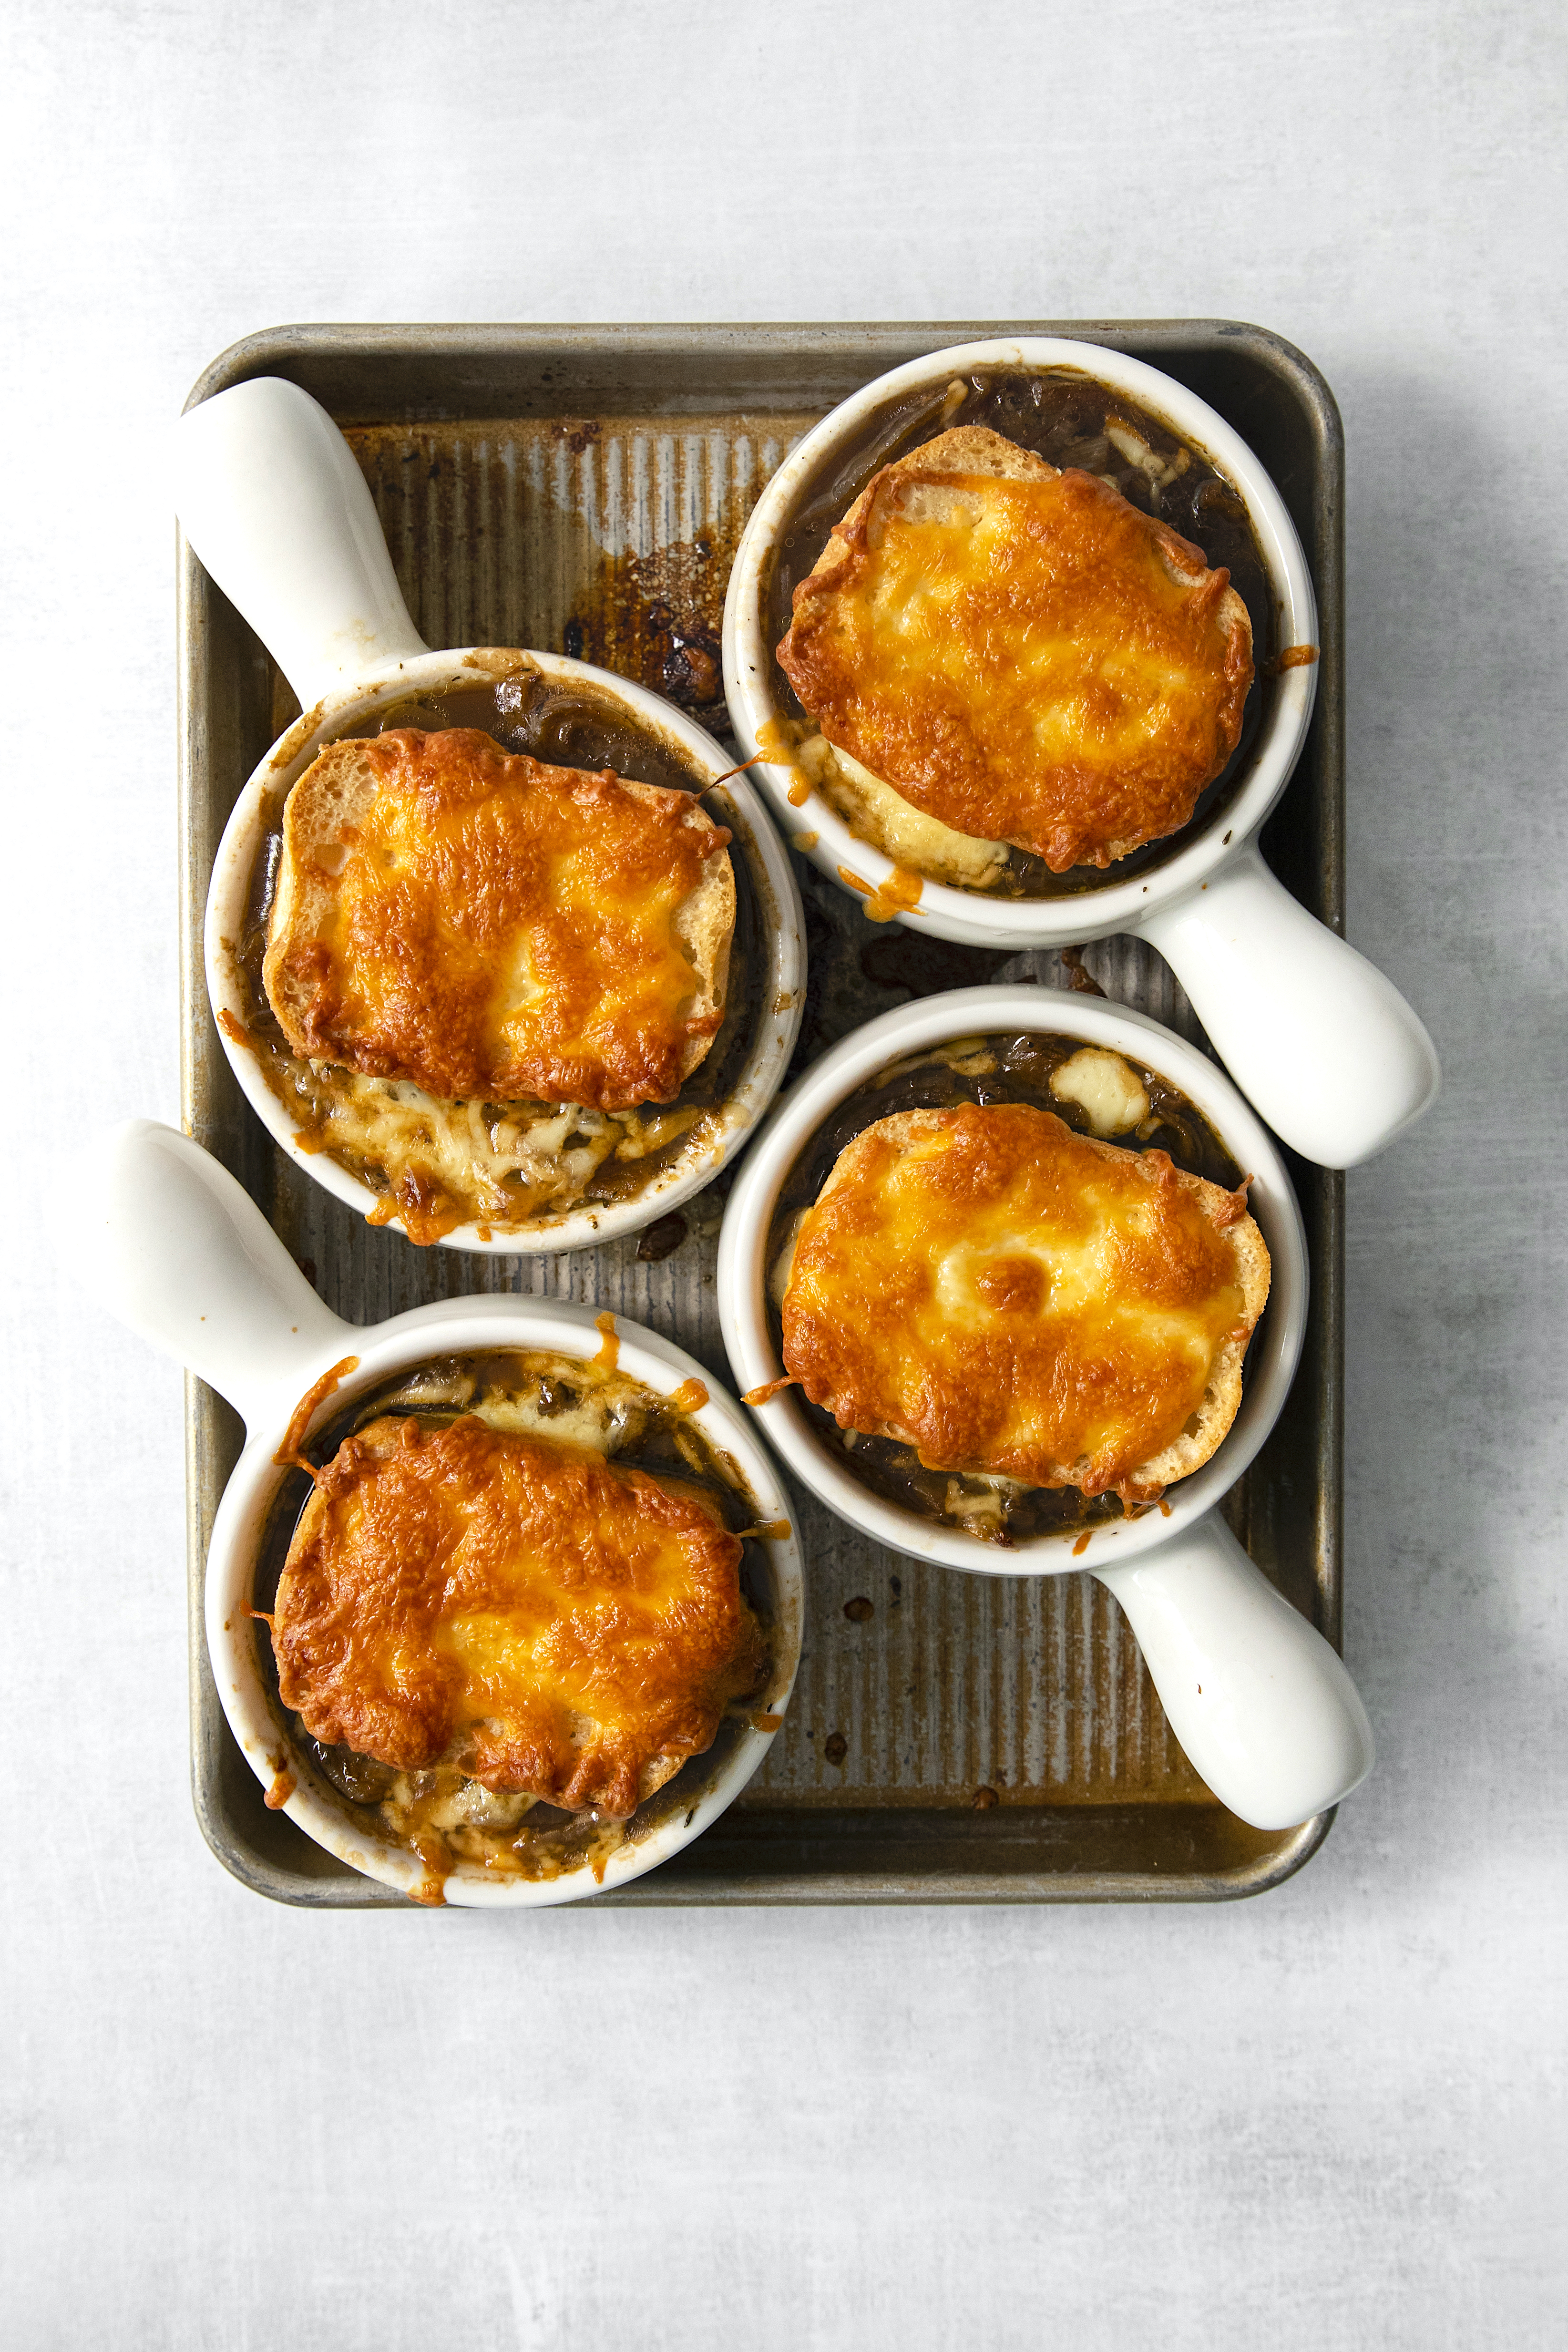 baked, cheesy french onion soup in four white bowls on a baking sheet.